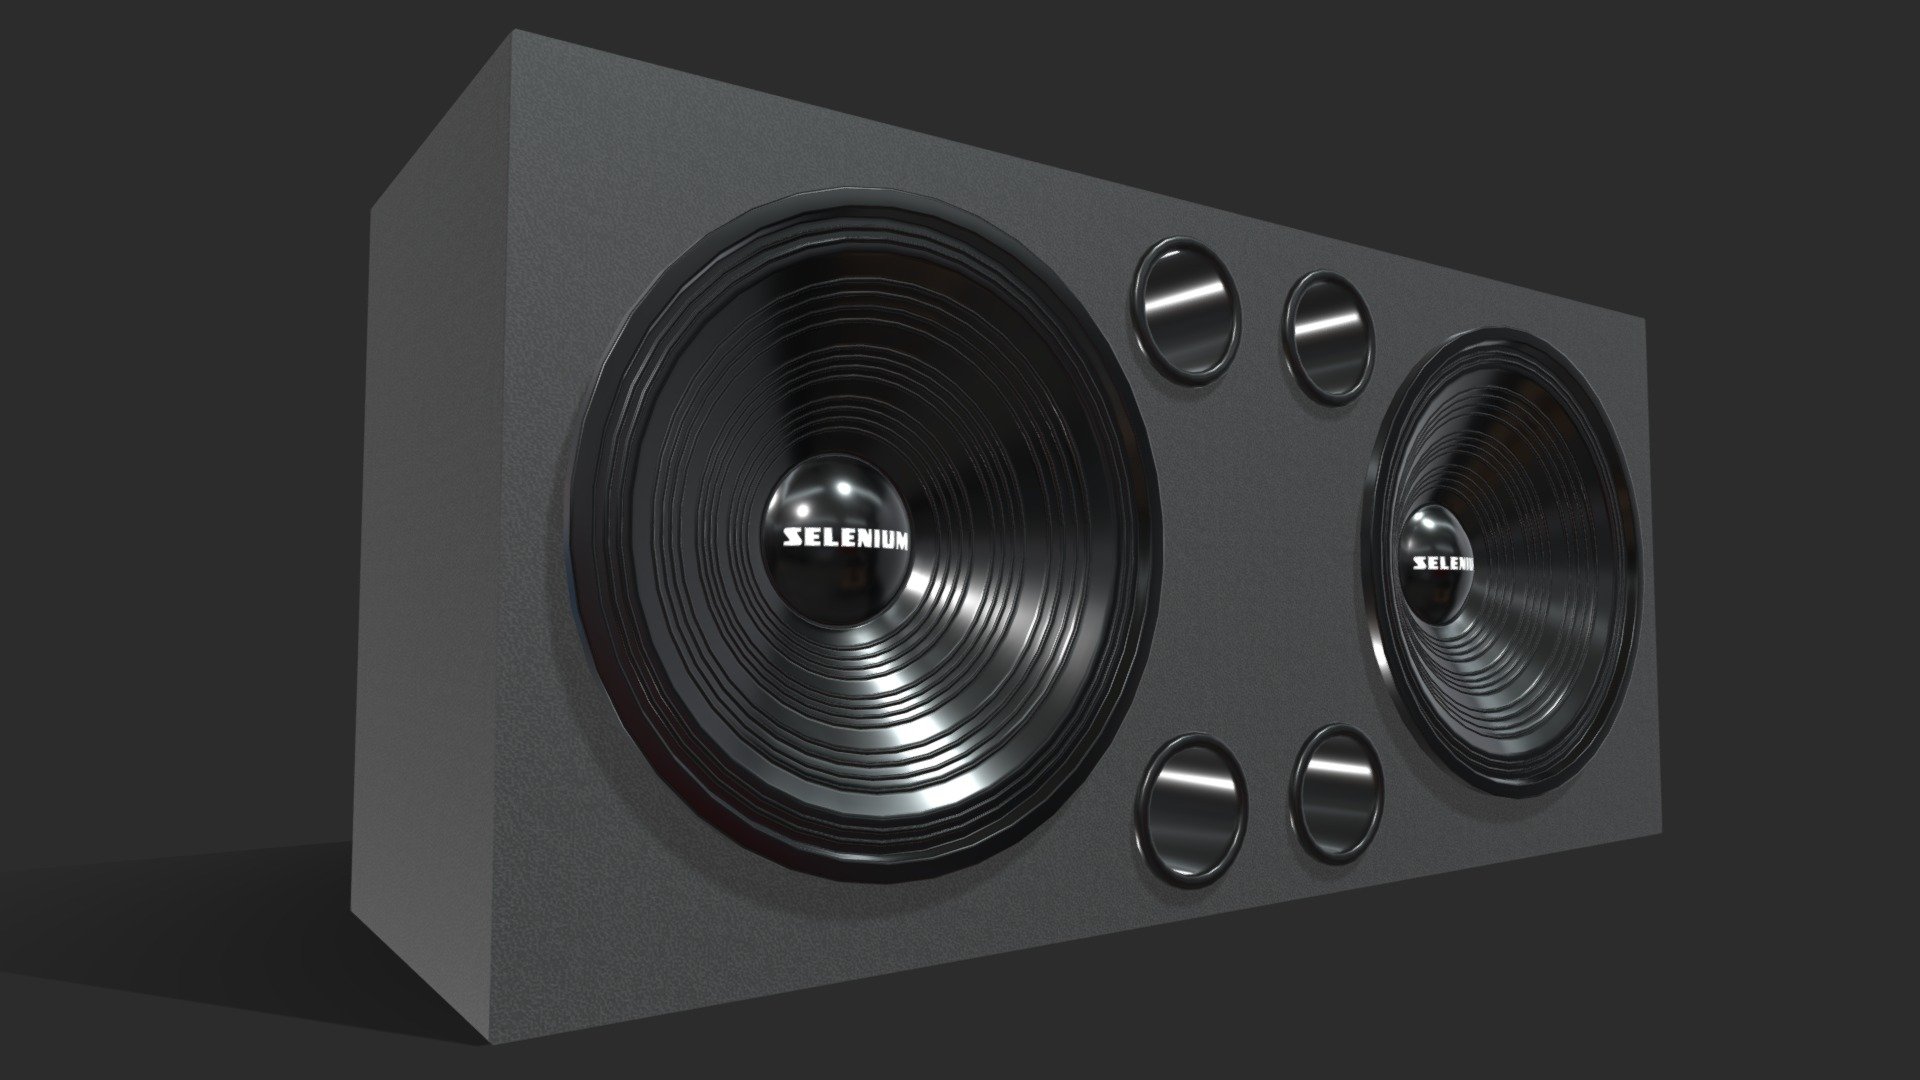 Car sound system Brazil! Soundbox with 2 sub-18 “Selenium” modeled in 3ds max

Low Poly :D

2 textures

made:2011

Formats - 3ds max - obj - fbx - Car Sound System Brazil Selenium - 3D model by lorranmedeiros 3d model